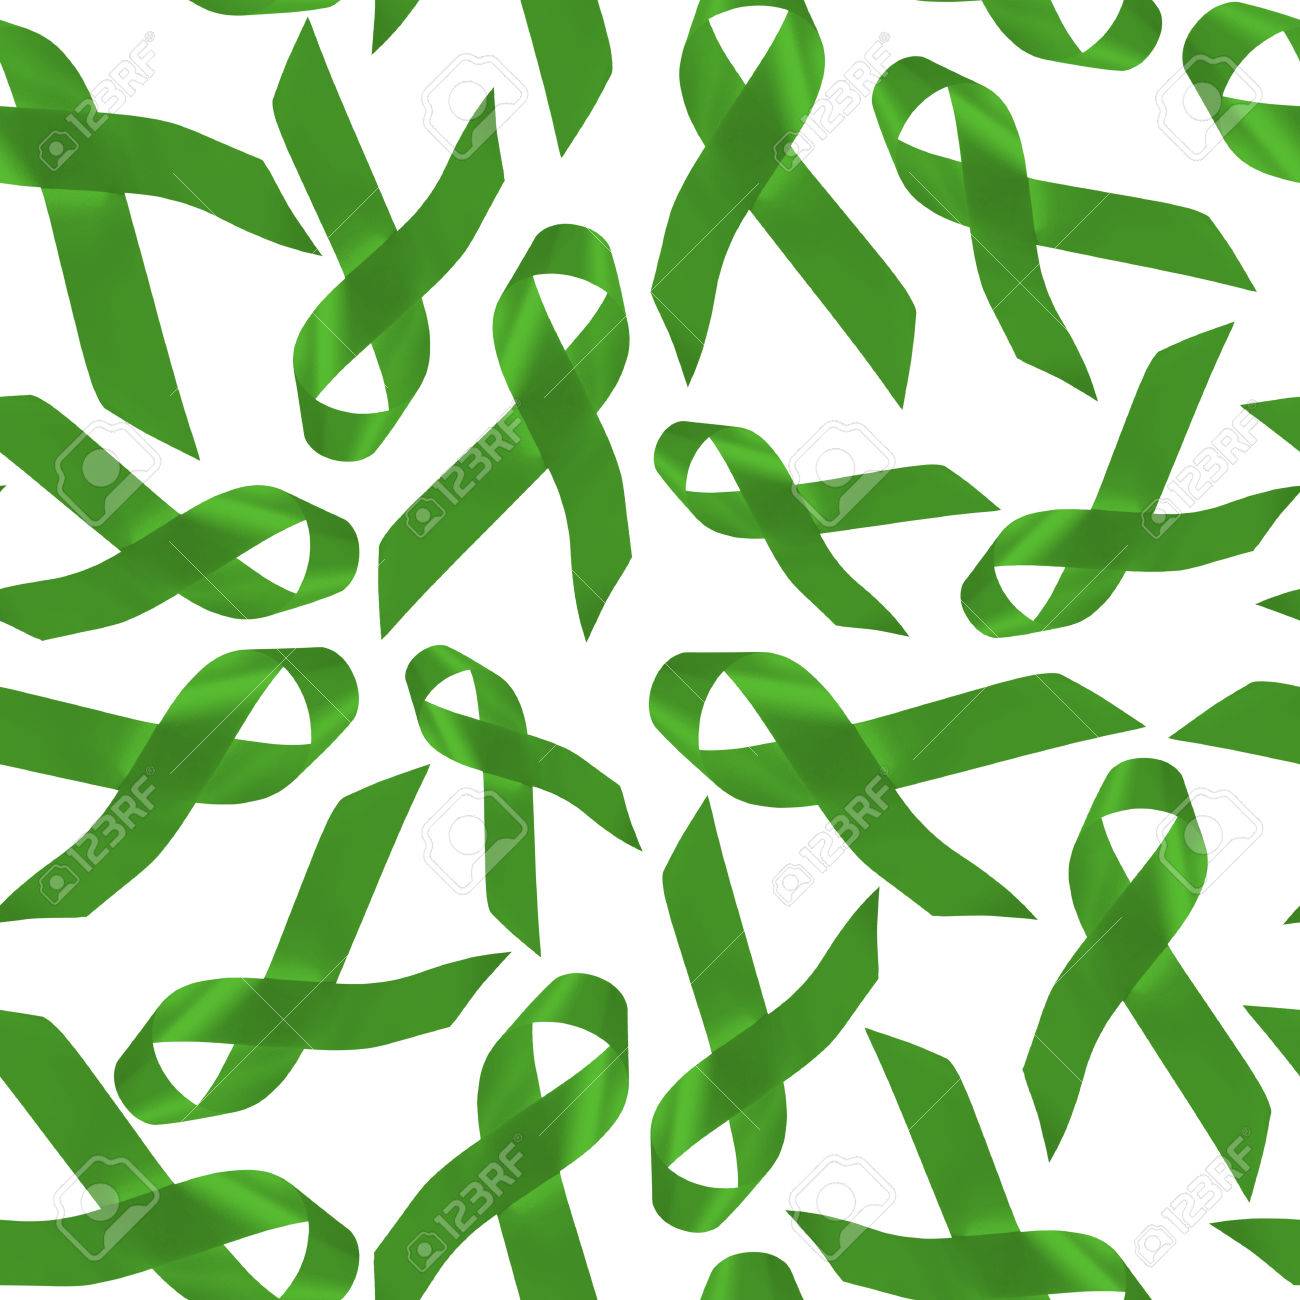 Kidney Cancer Awareness Background Seamless Pattern Made Of